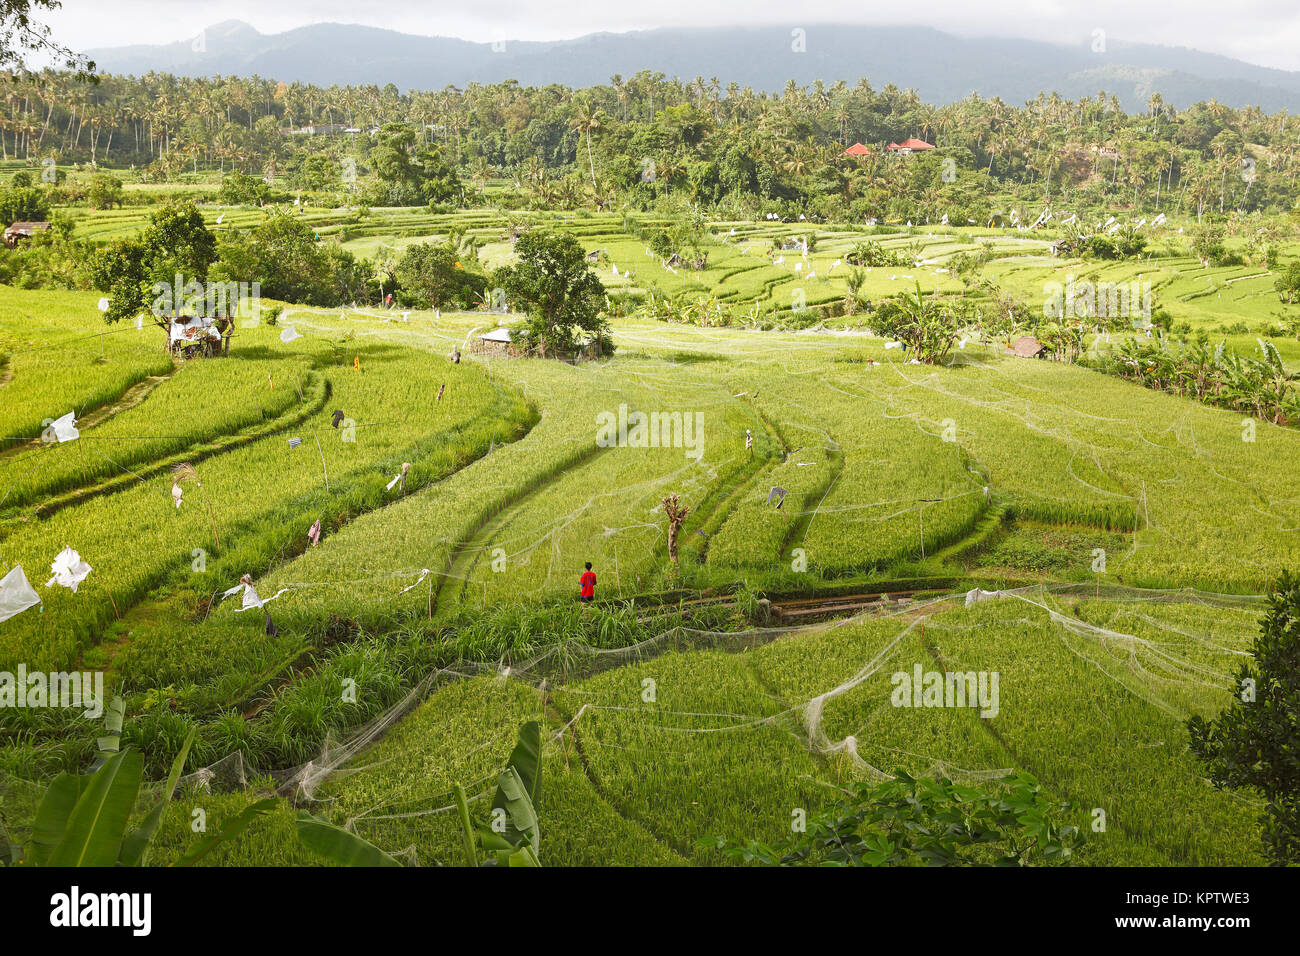 Rice fields protected with nets, Bali, Indonesia Stock Photo